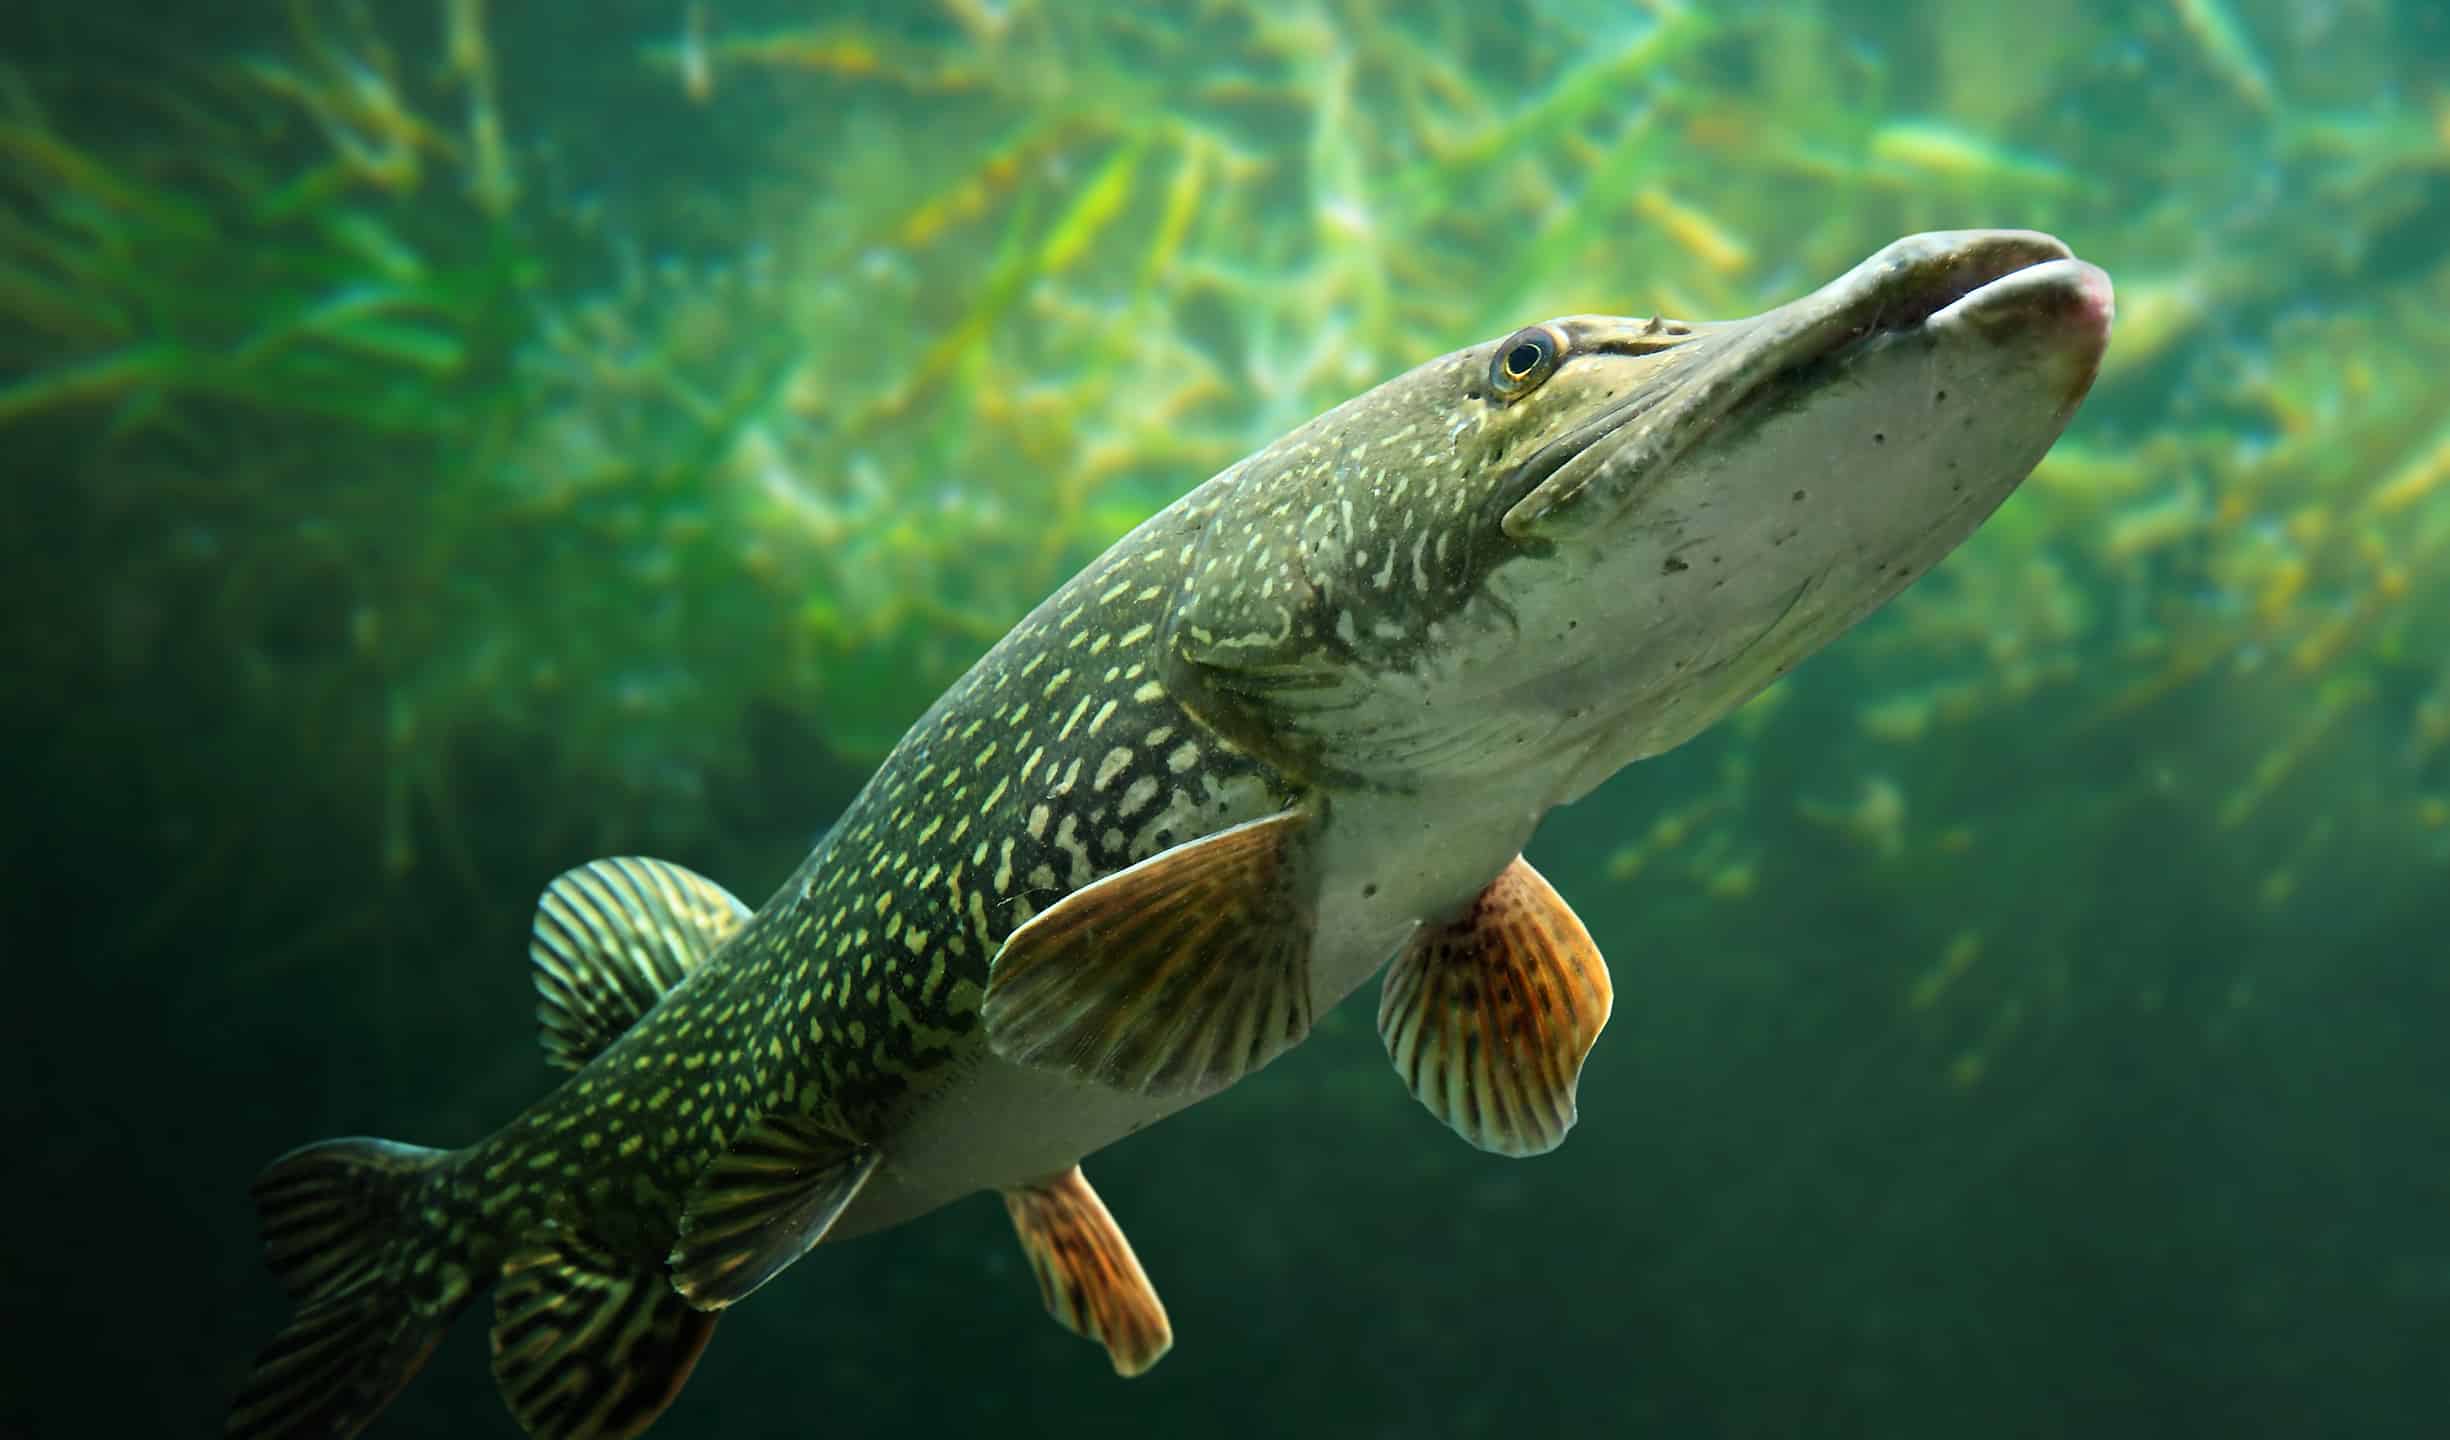 Underwater photo of a big Northern Pike, which is a similar fish to the official state fish of South Dakota